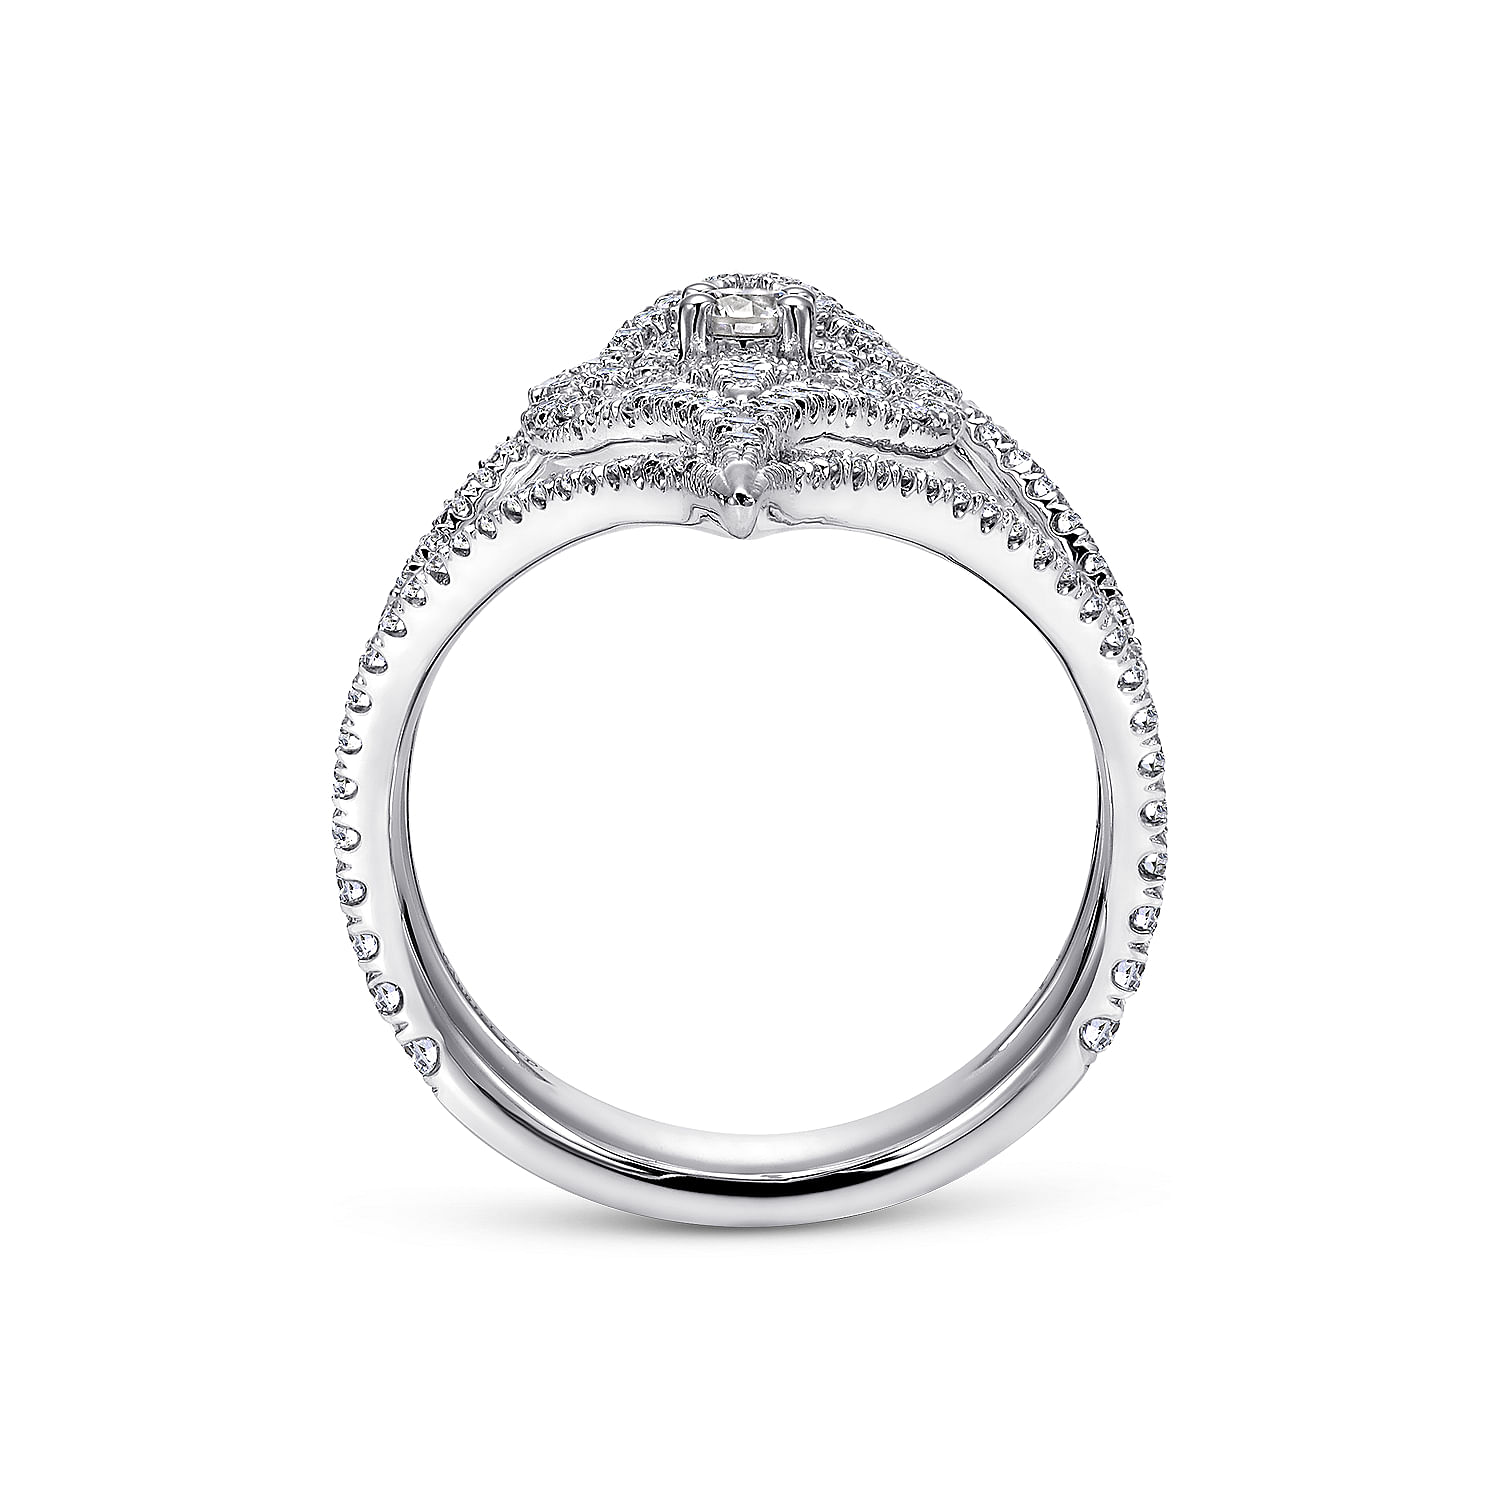 18K White Gold Wide Open Floral Diamond Statement Ring